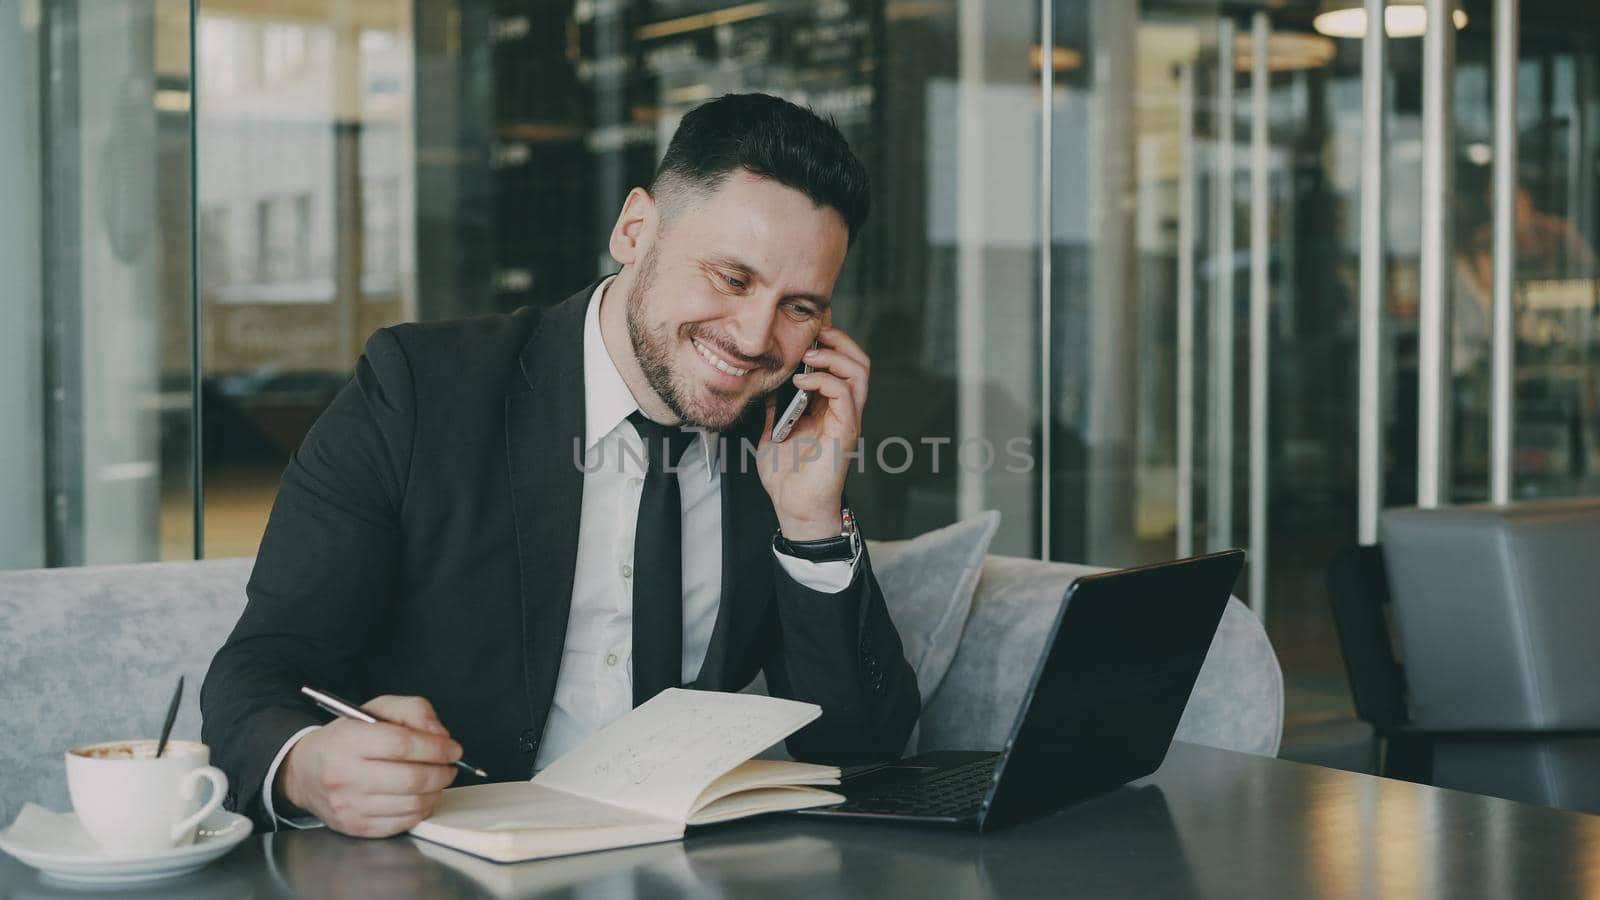 Bearded smiling businessman using laptop computer, talking on smartphone and writing down business information in modern cafe indoors during lunch break